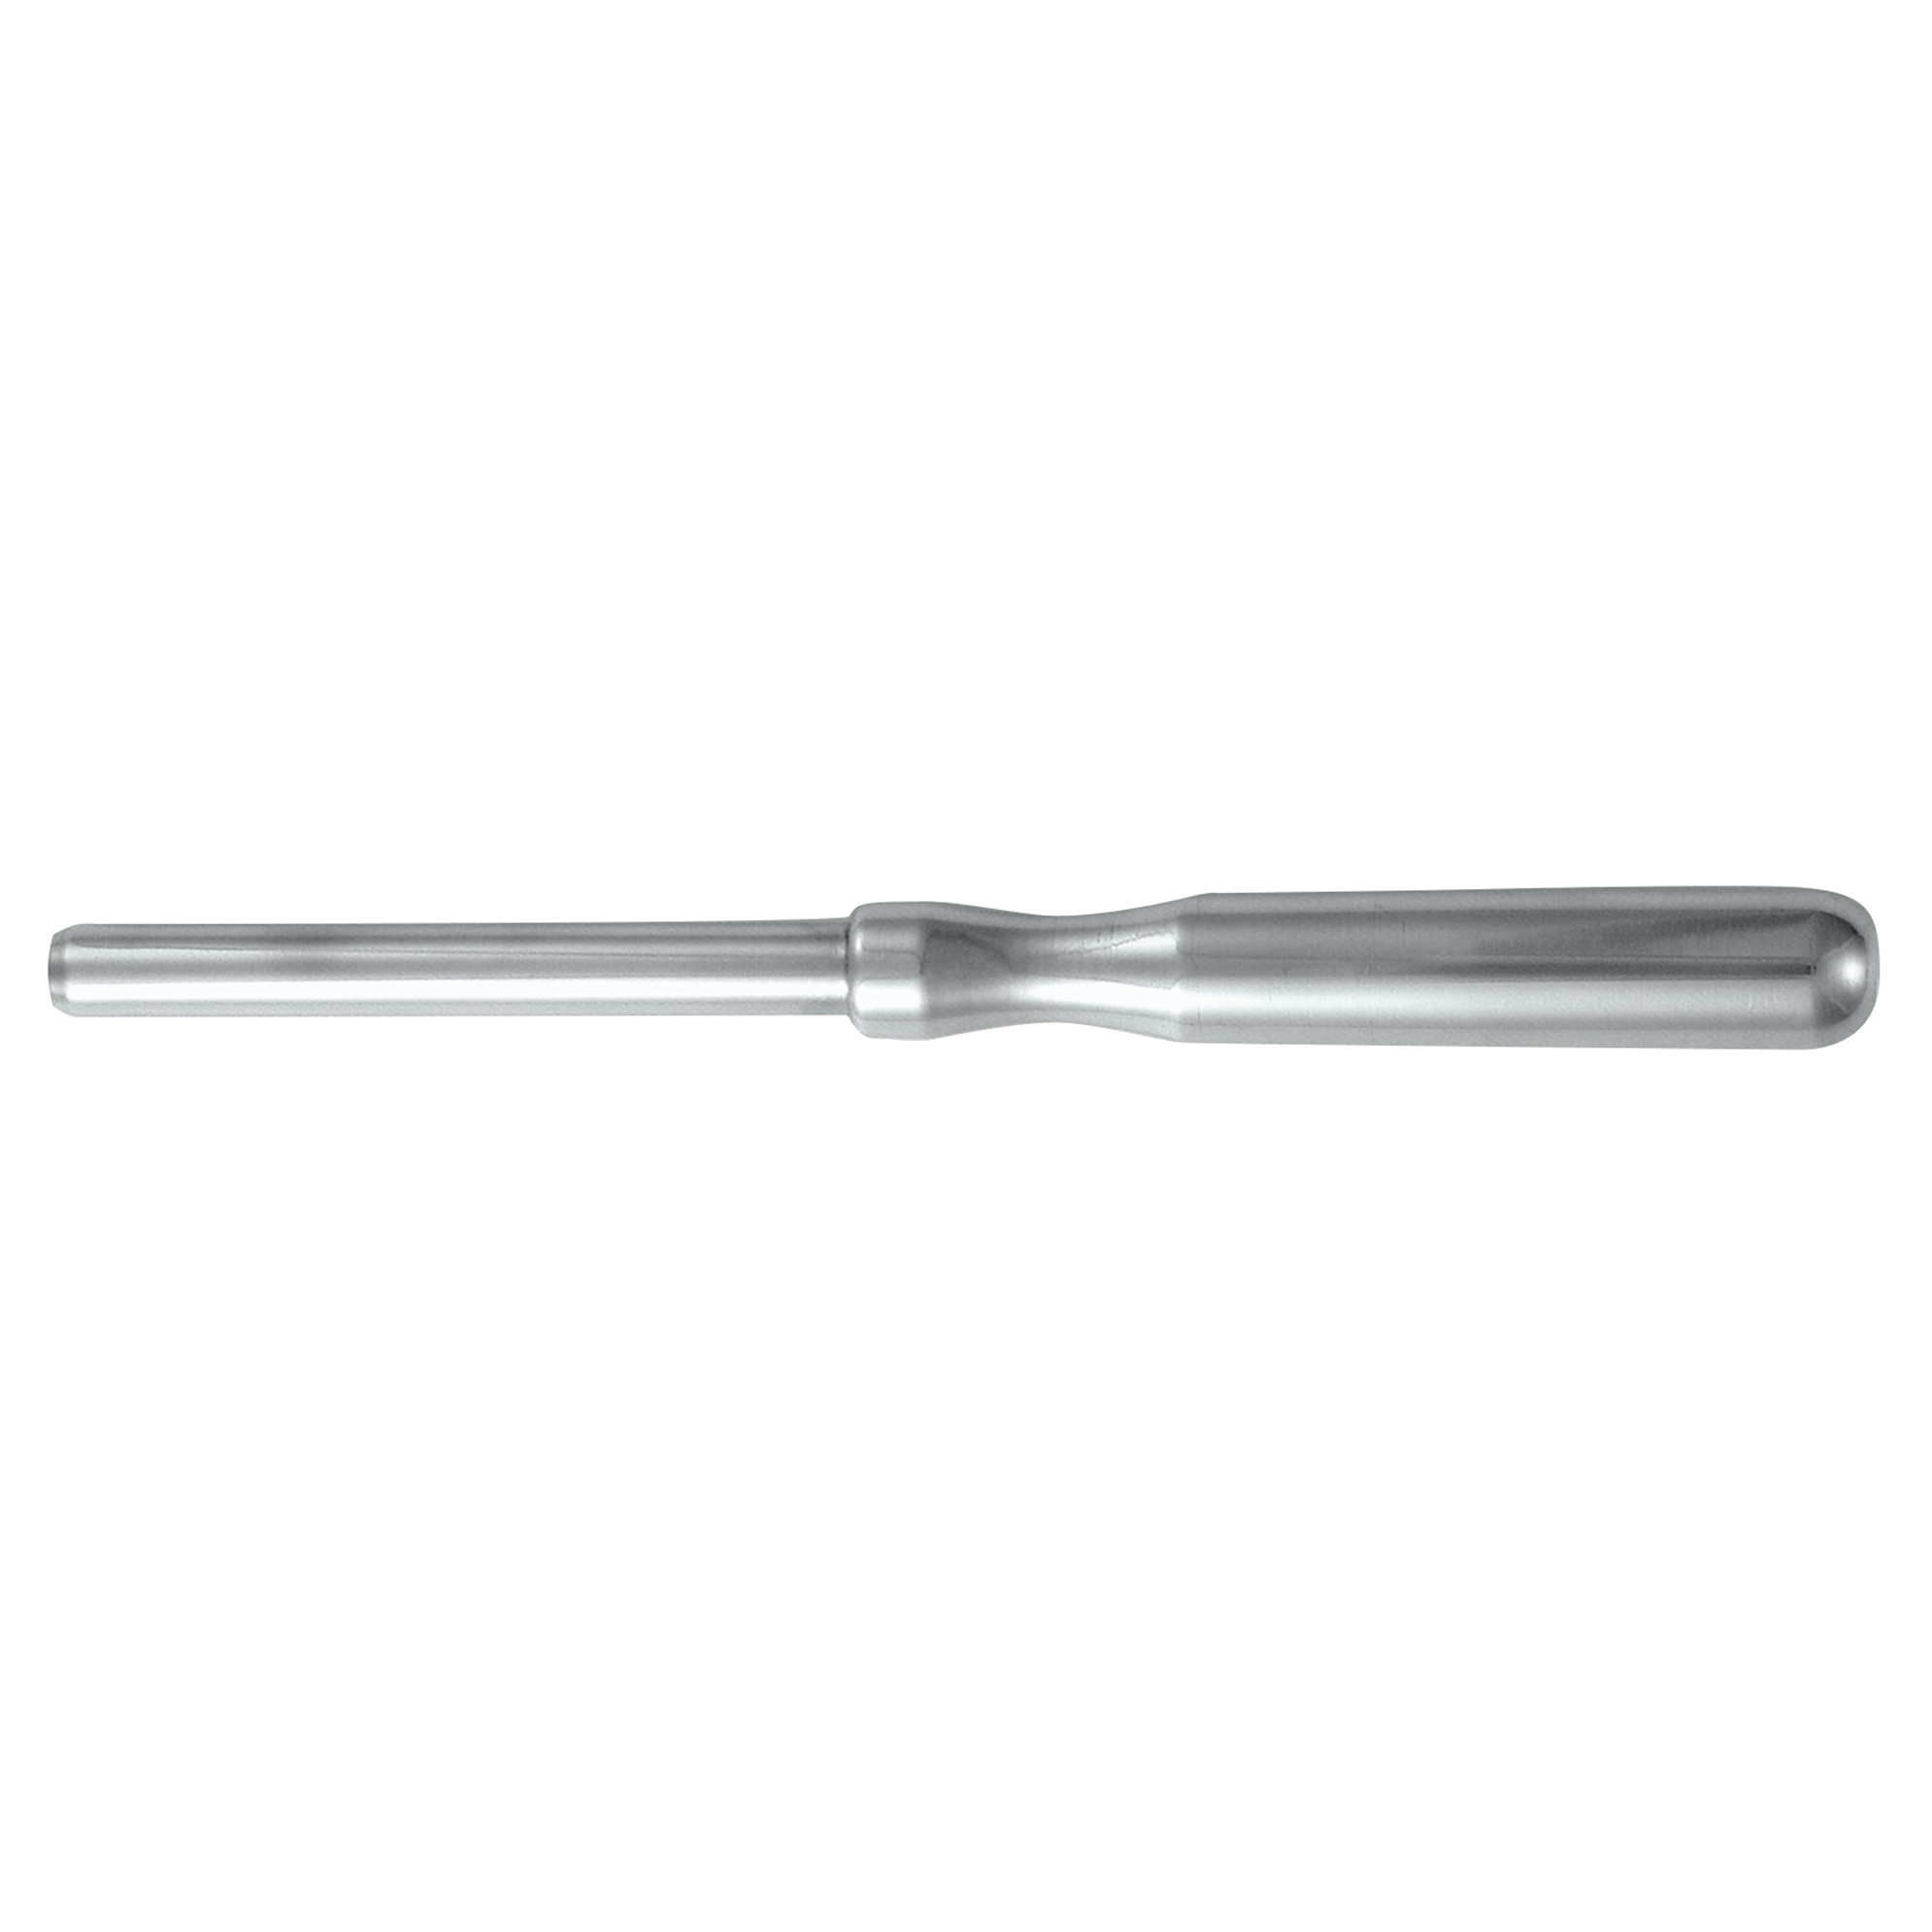 4990-300 (implant tray punch)